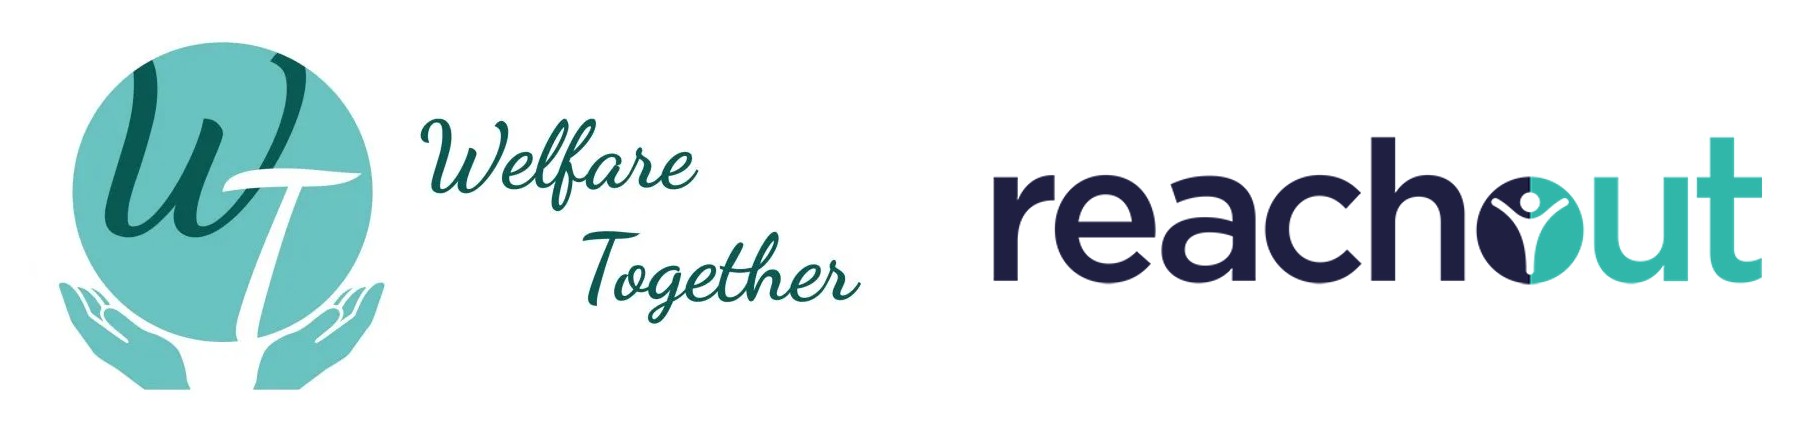 Logos for Welfare Together and ReachOut